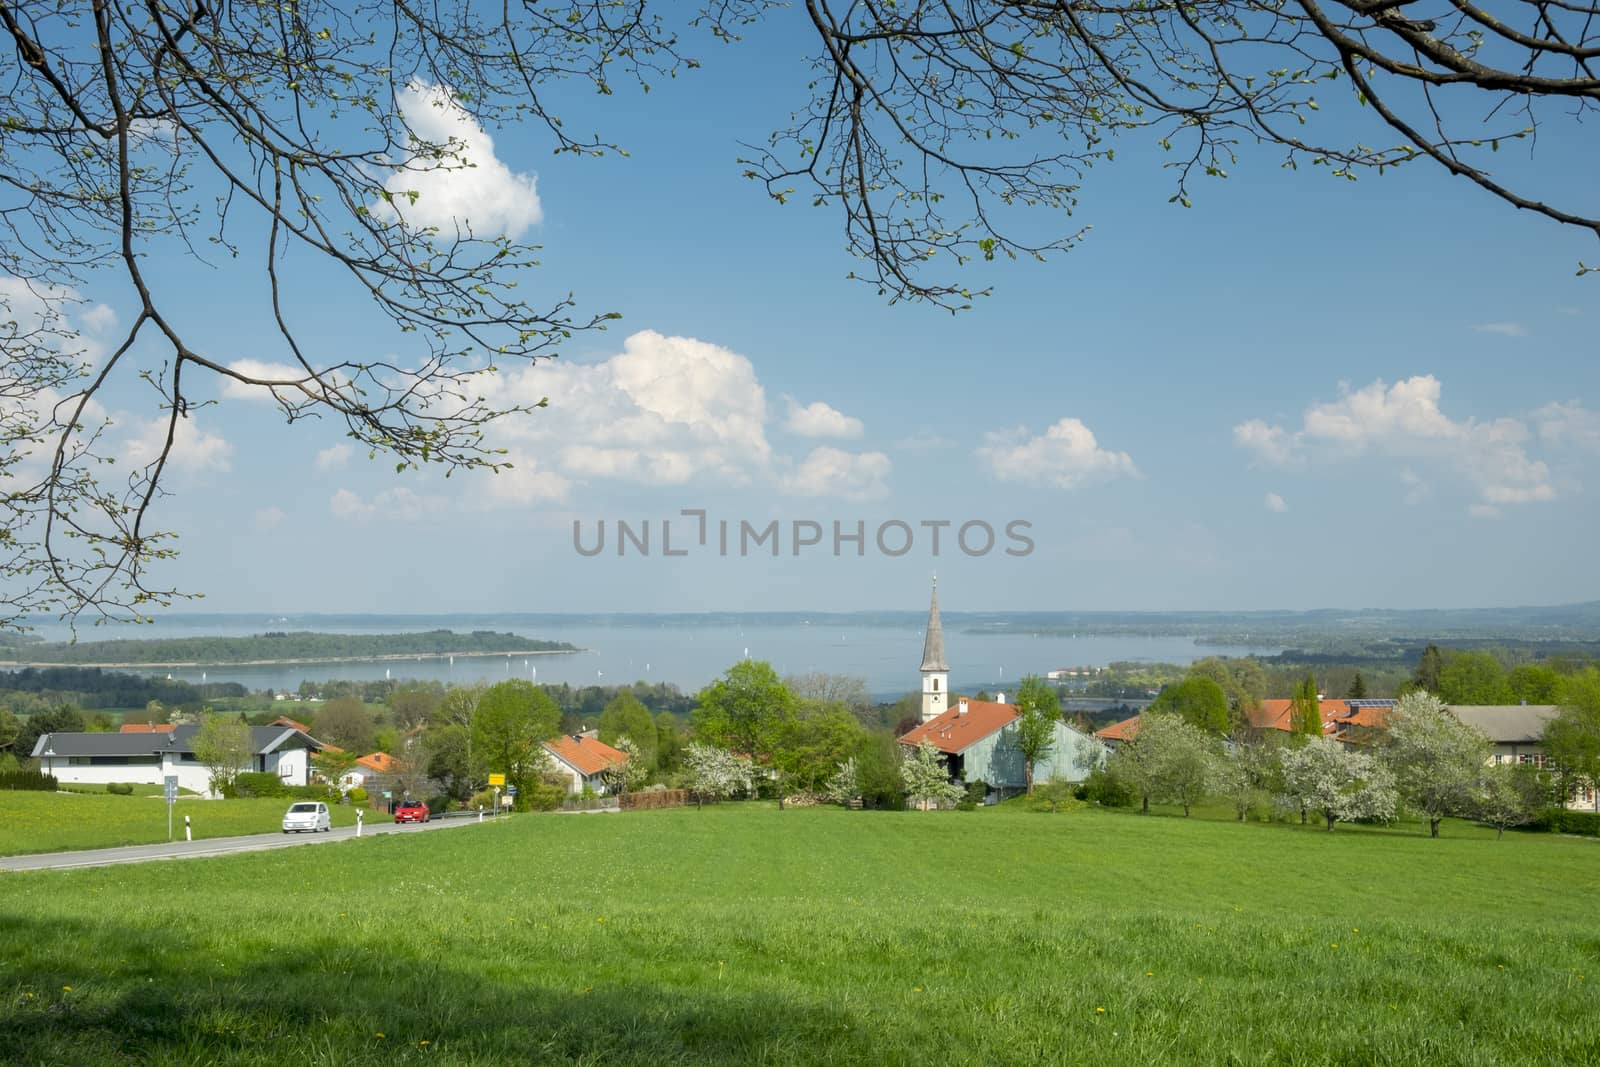 View to Chiemsee in Bavaria, Germany in spring